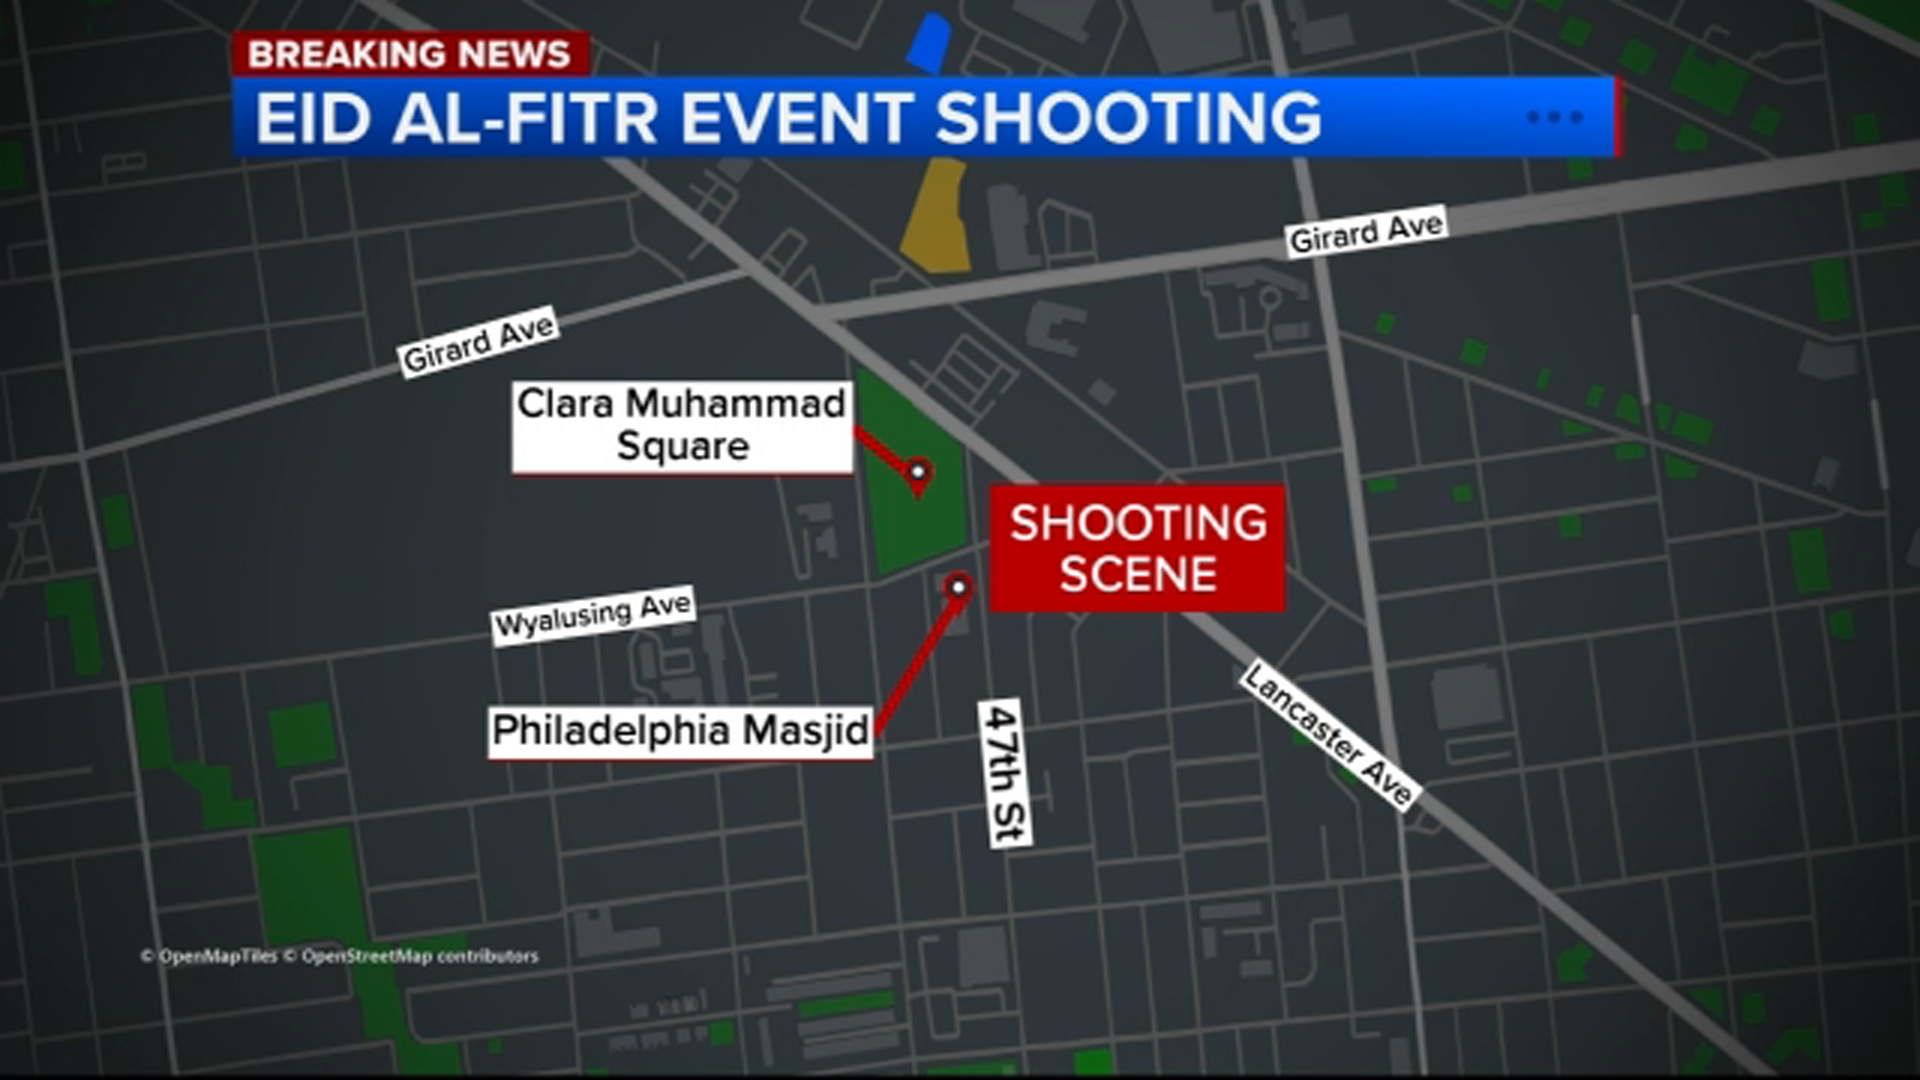 3 shot and 5 in custody after gunfire disrupts Philadelphia Eid event, police say